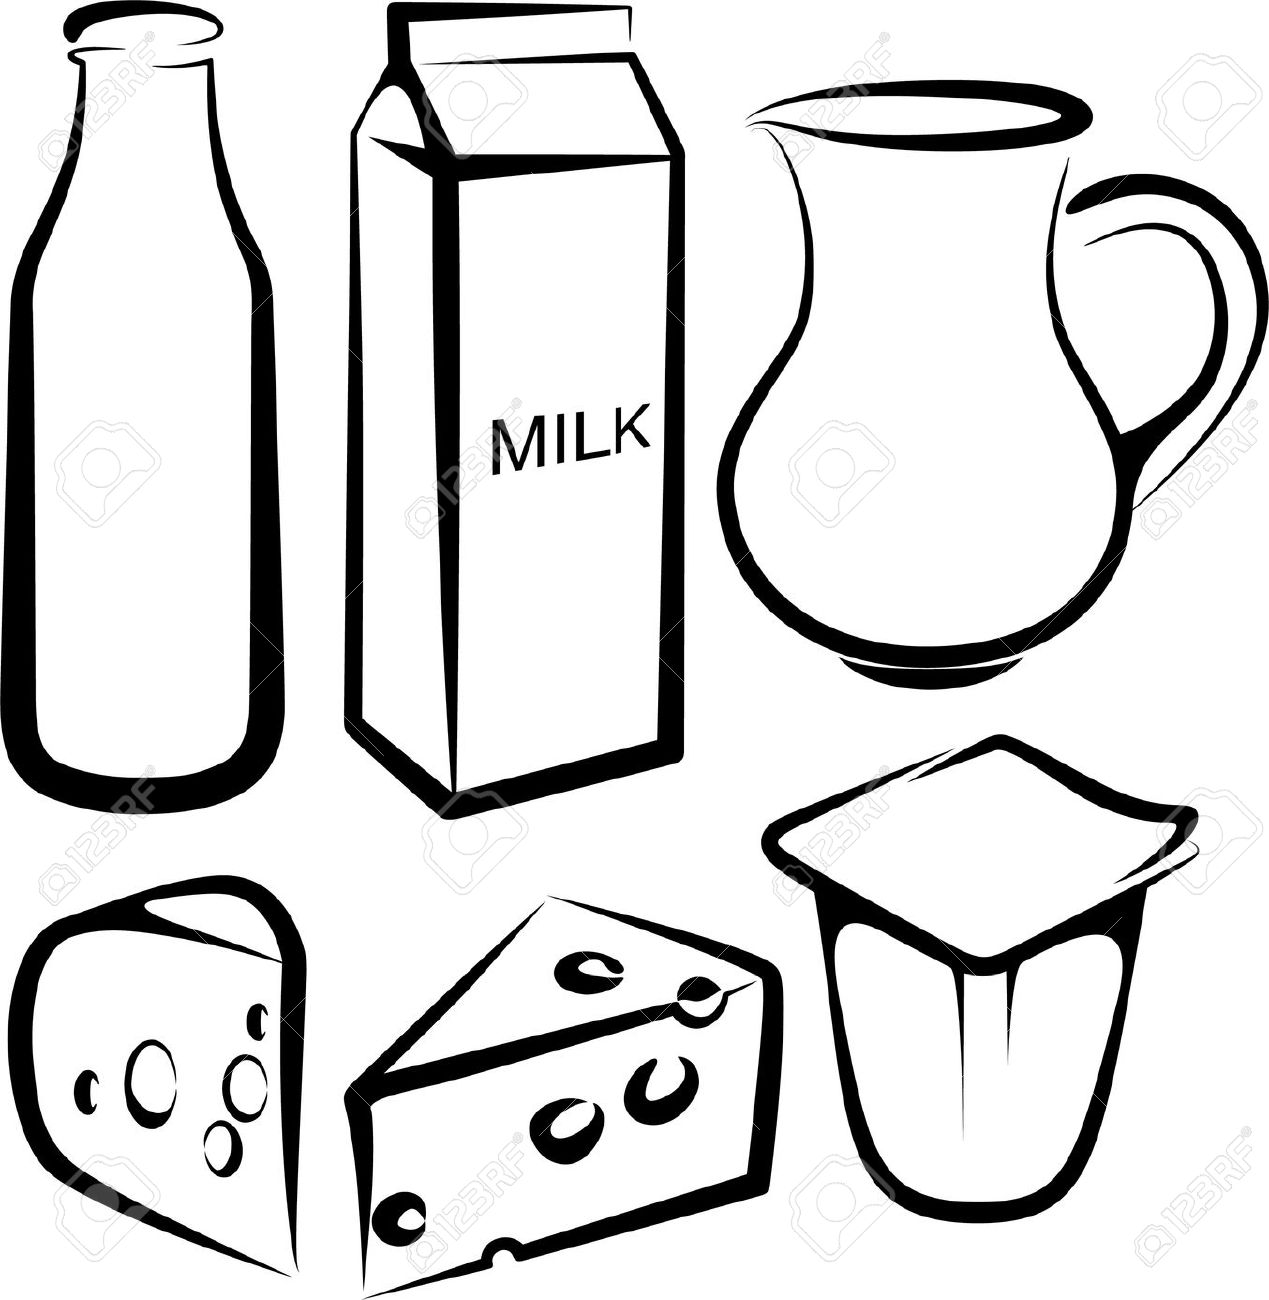 Milk products collection hand drawn elements Vector Image